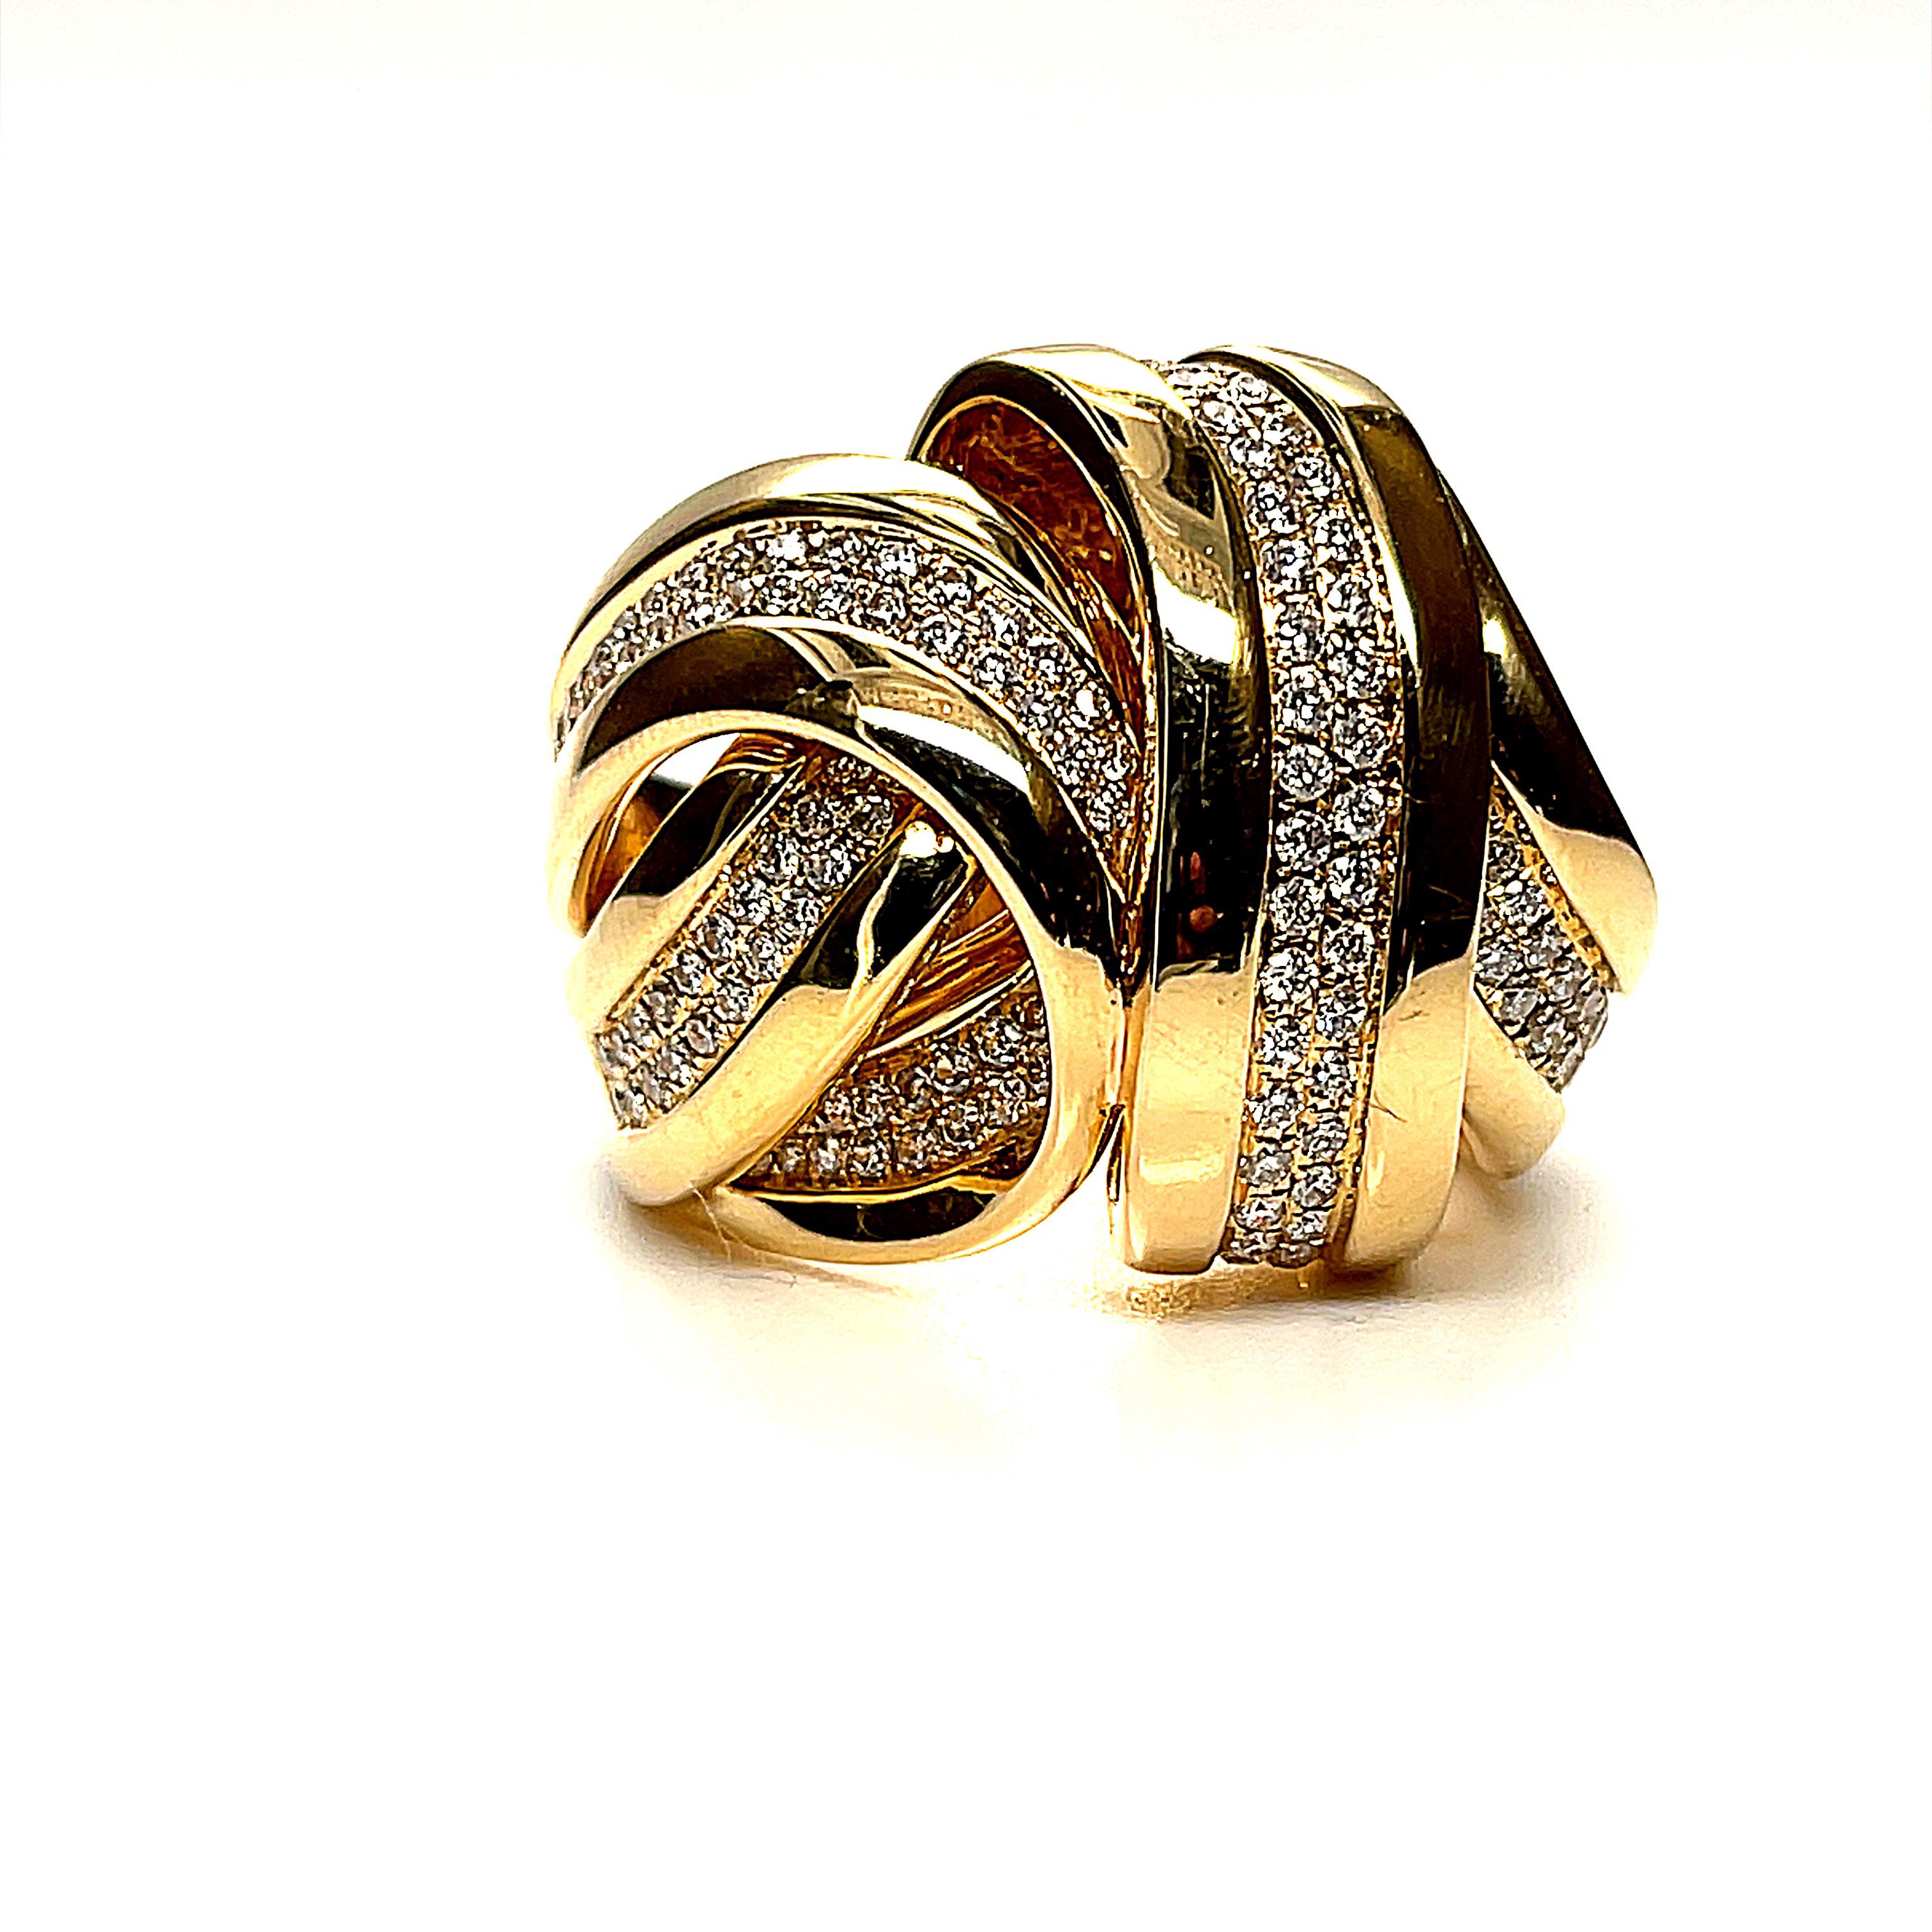 This handsome 18k yellow gold dome ring features a total of 1.35 carats of round brilliant diamonds, pave set in flowing 